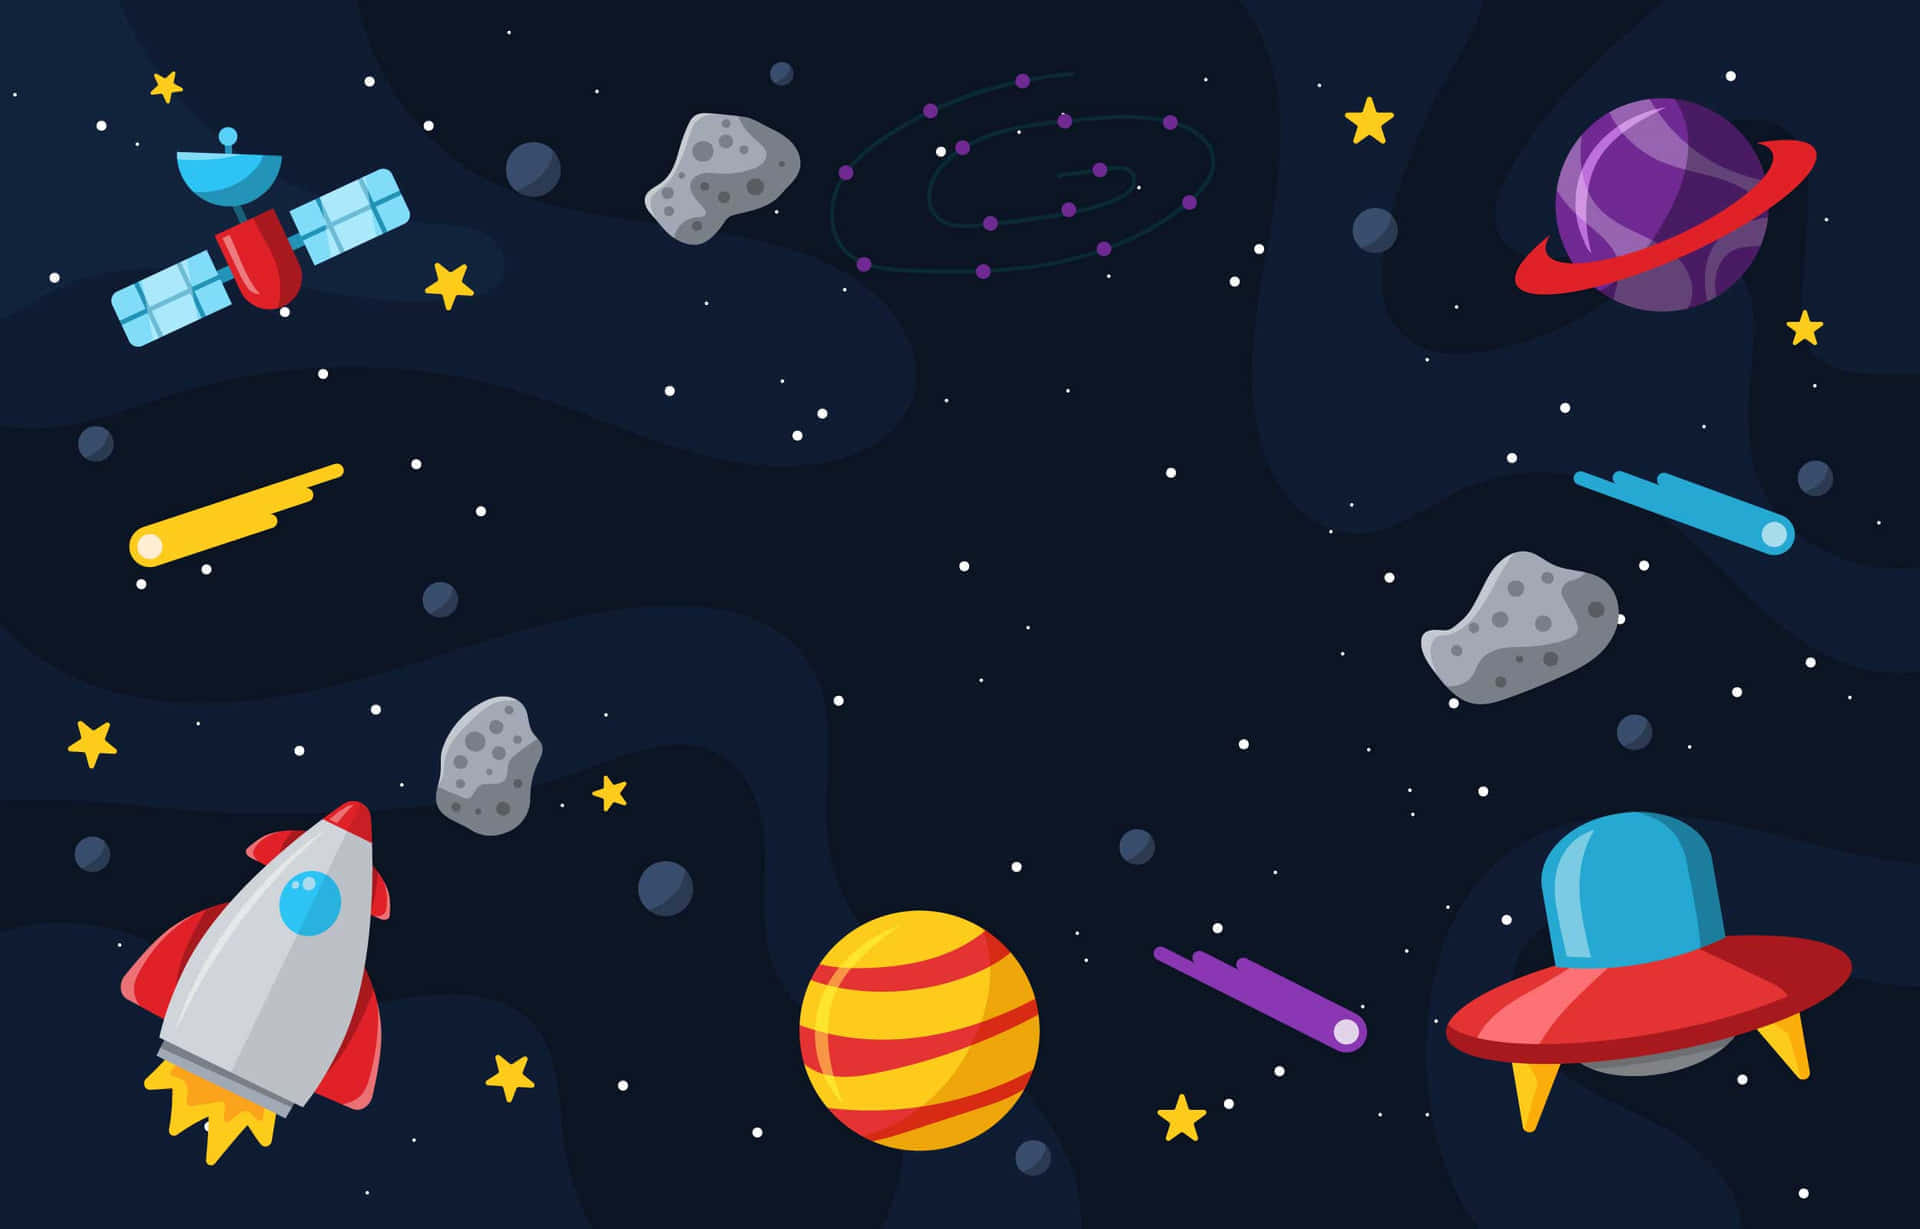 Explore the outer realms of the universe with Animated Space